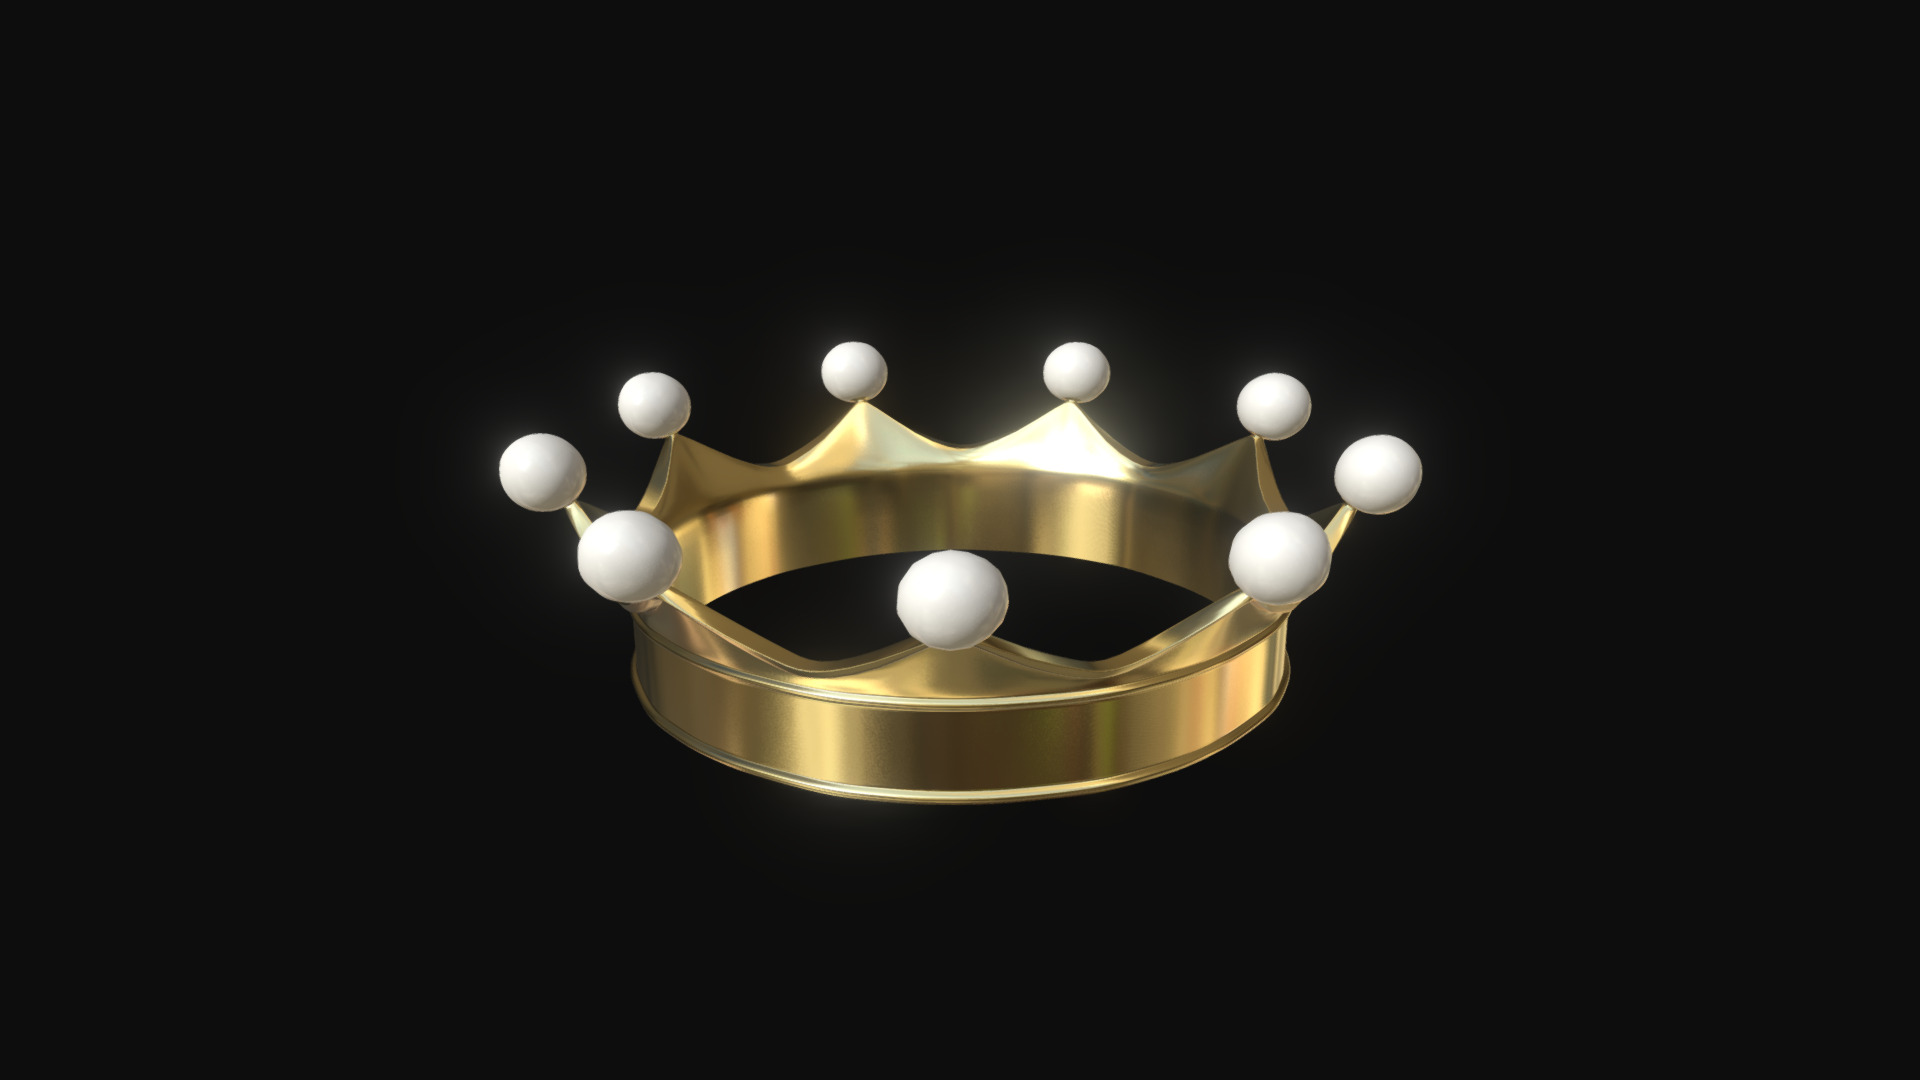 3D model Gold crown with pearls - This is a 3D model of the Gold crown with pearls. The 3D model is about a circular object with lights.